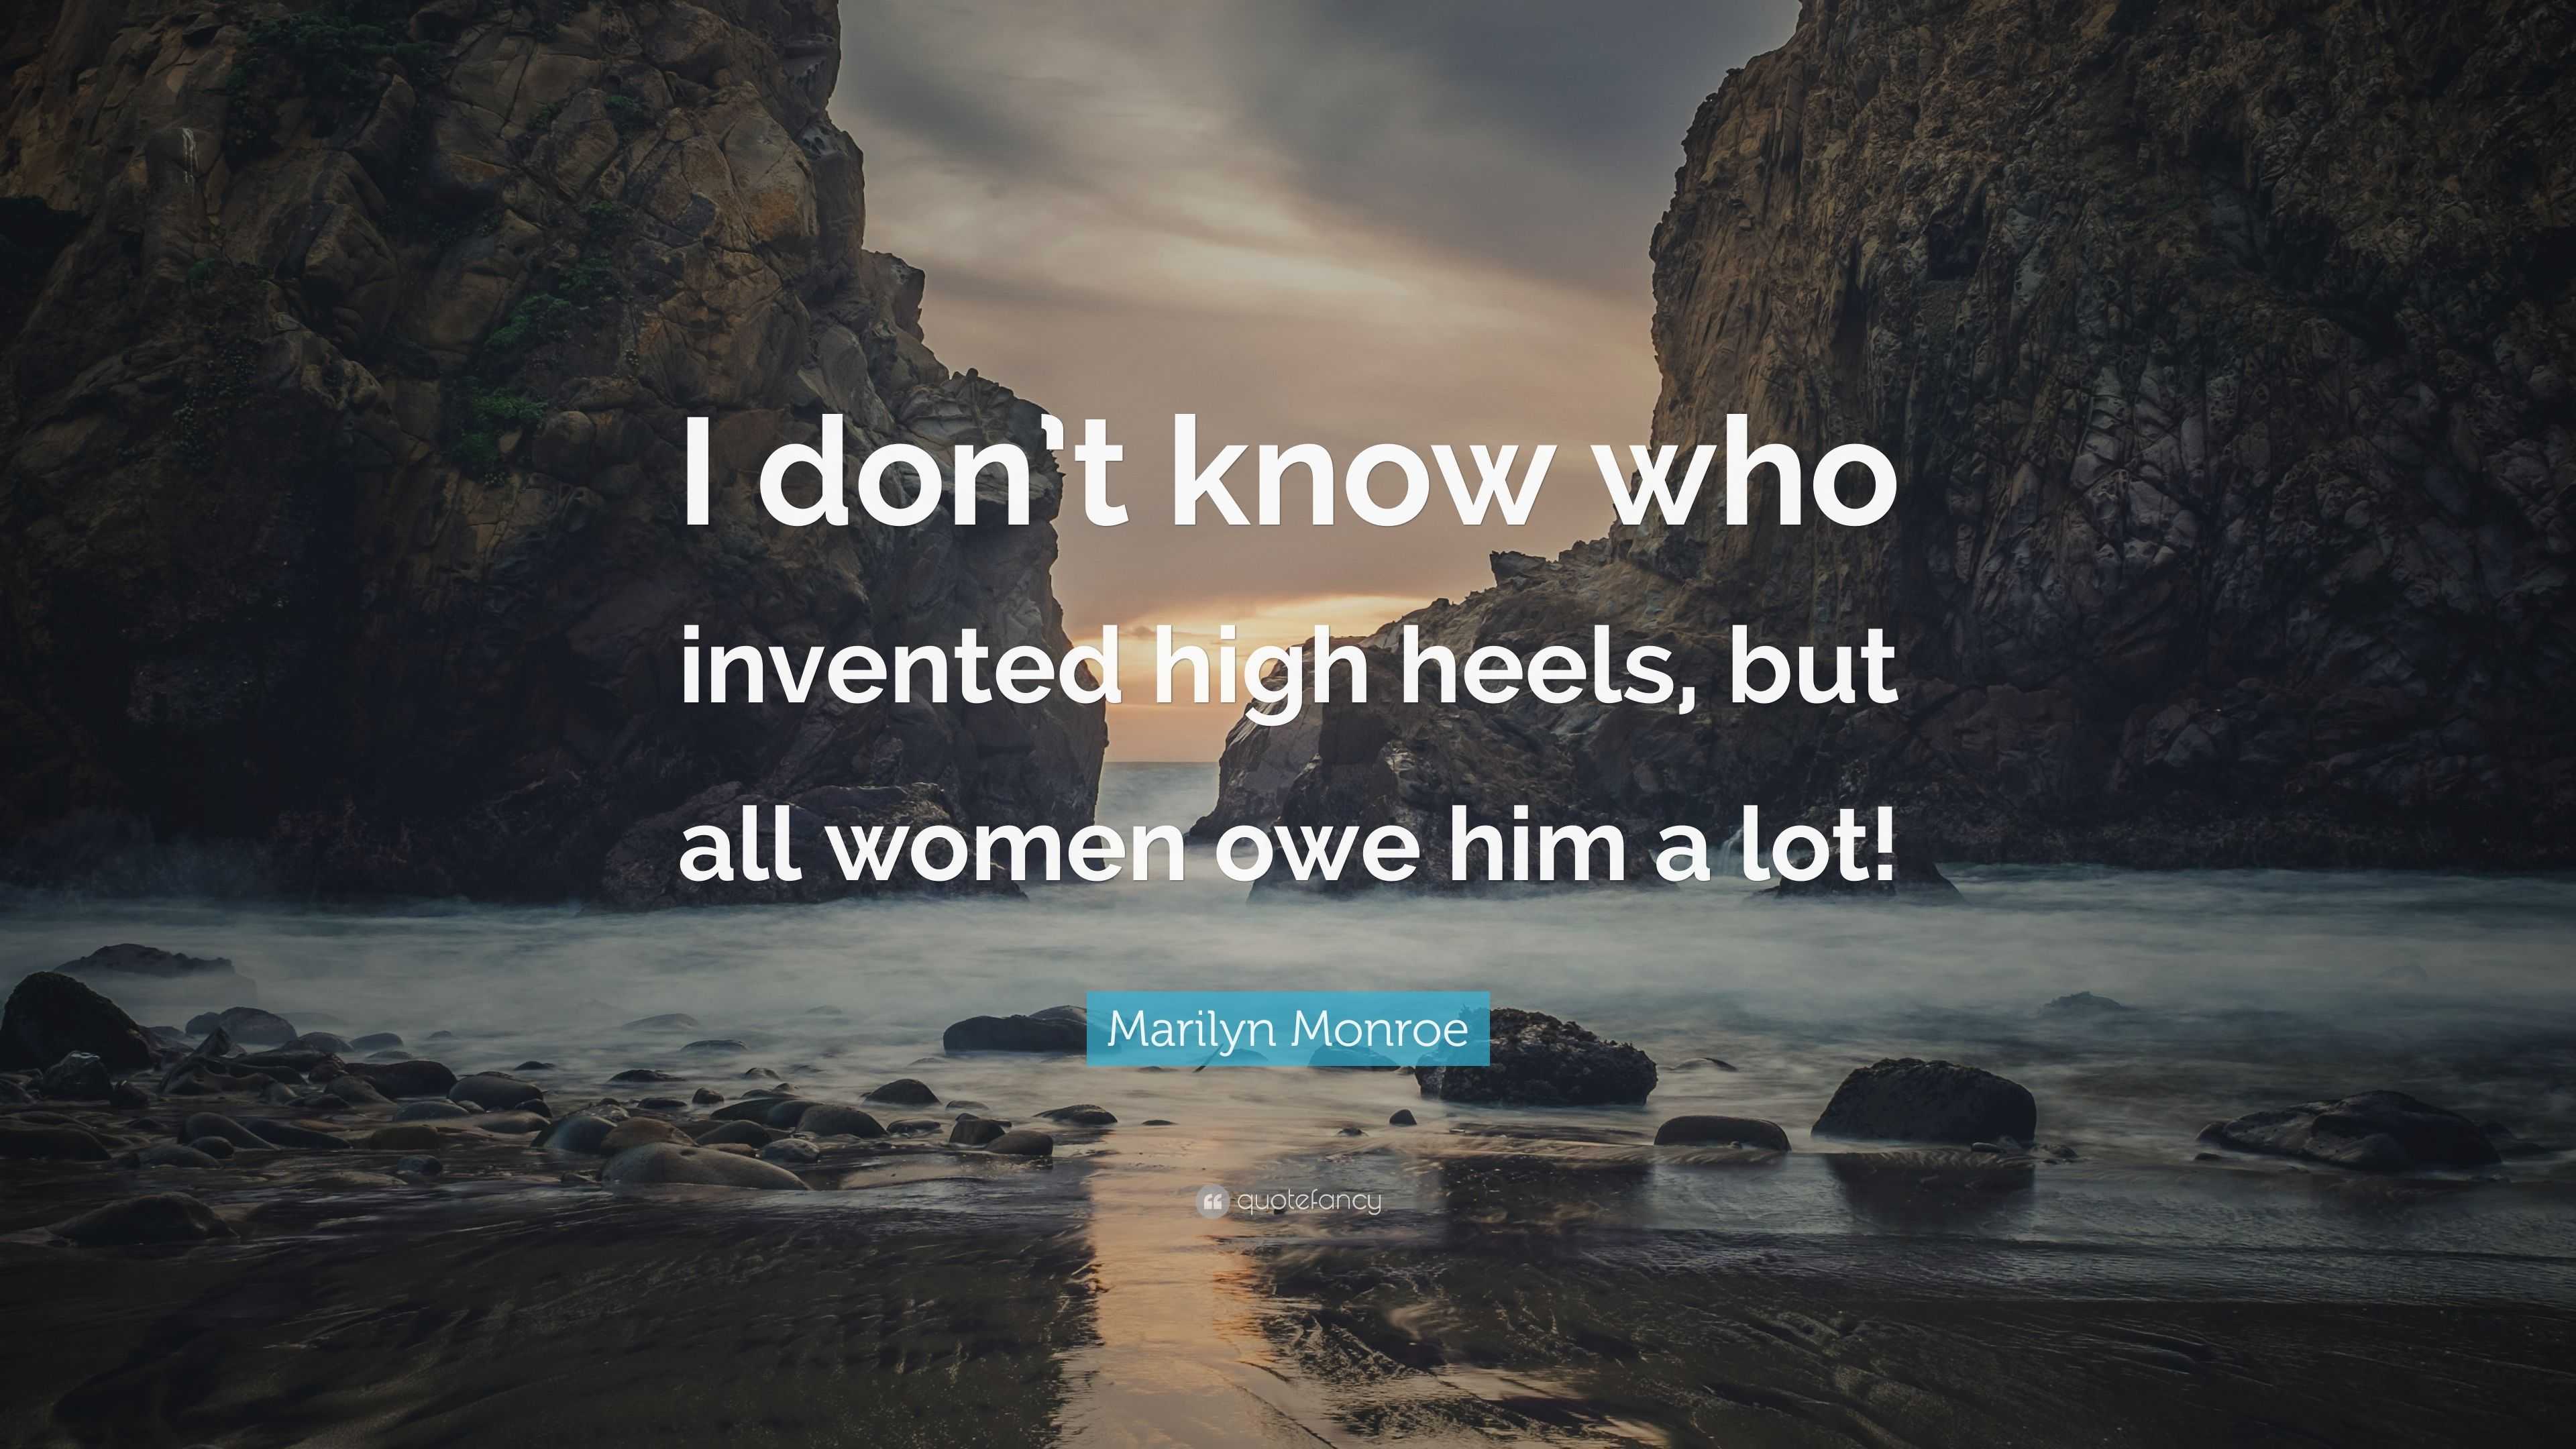 Marilyn Monroe Quote: “I don’t know who invented high heels, but all ...